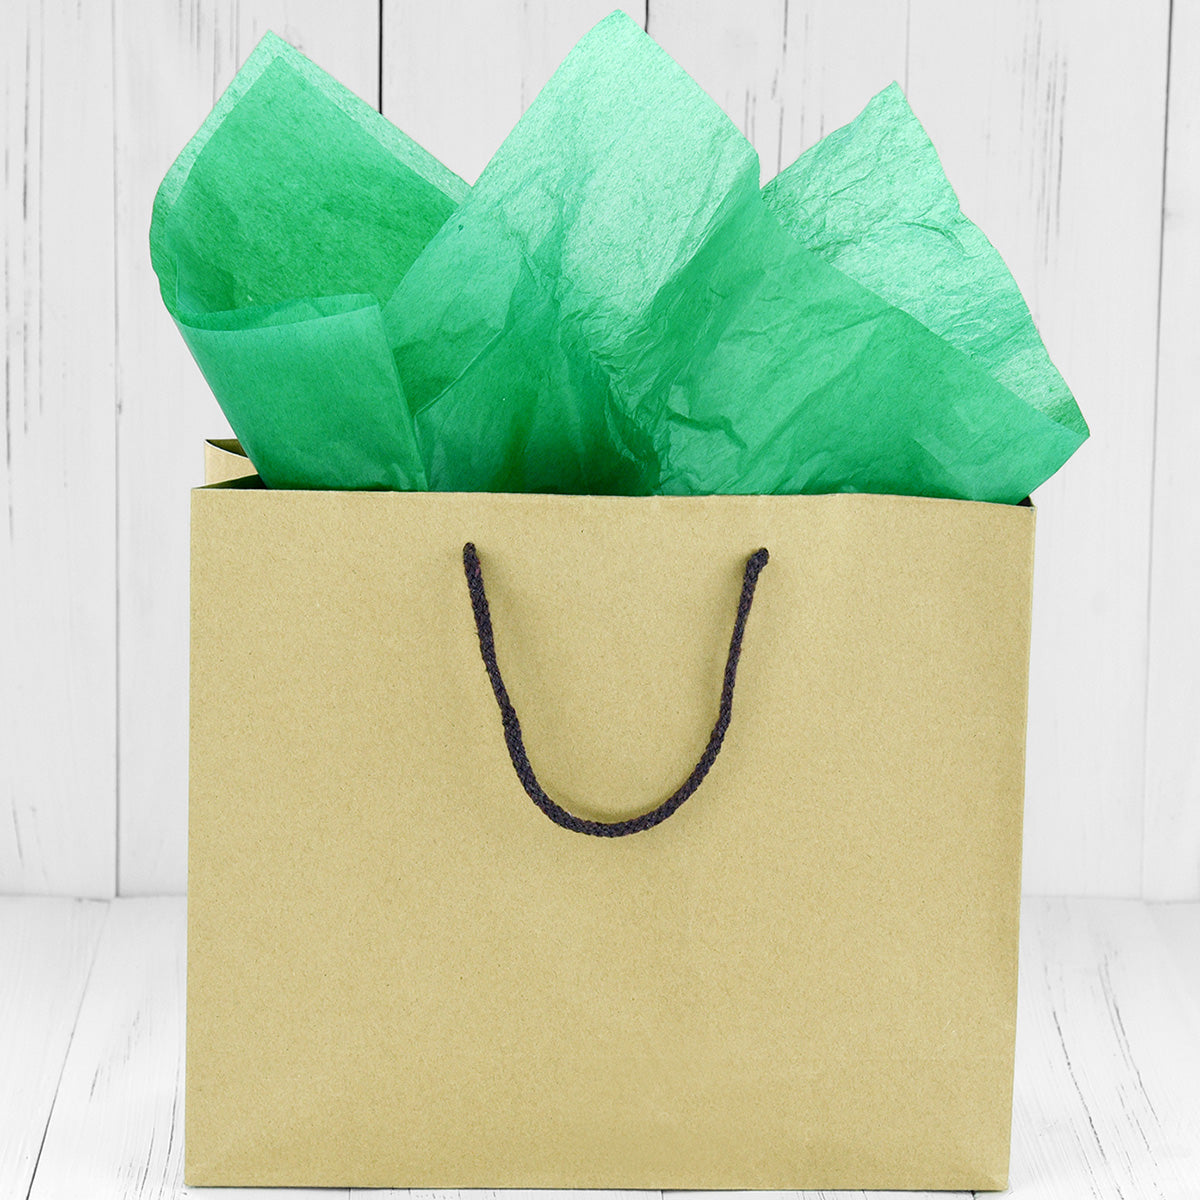 50 Sheets Dark Green Wrapping Tissue Paper